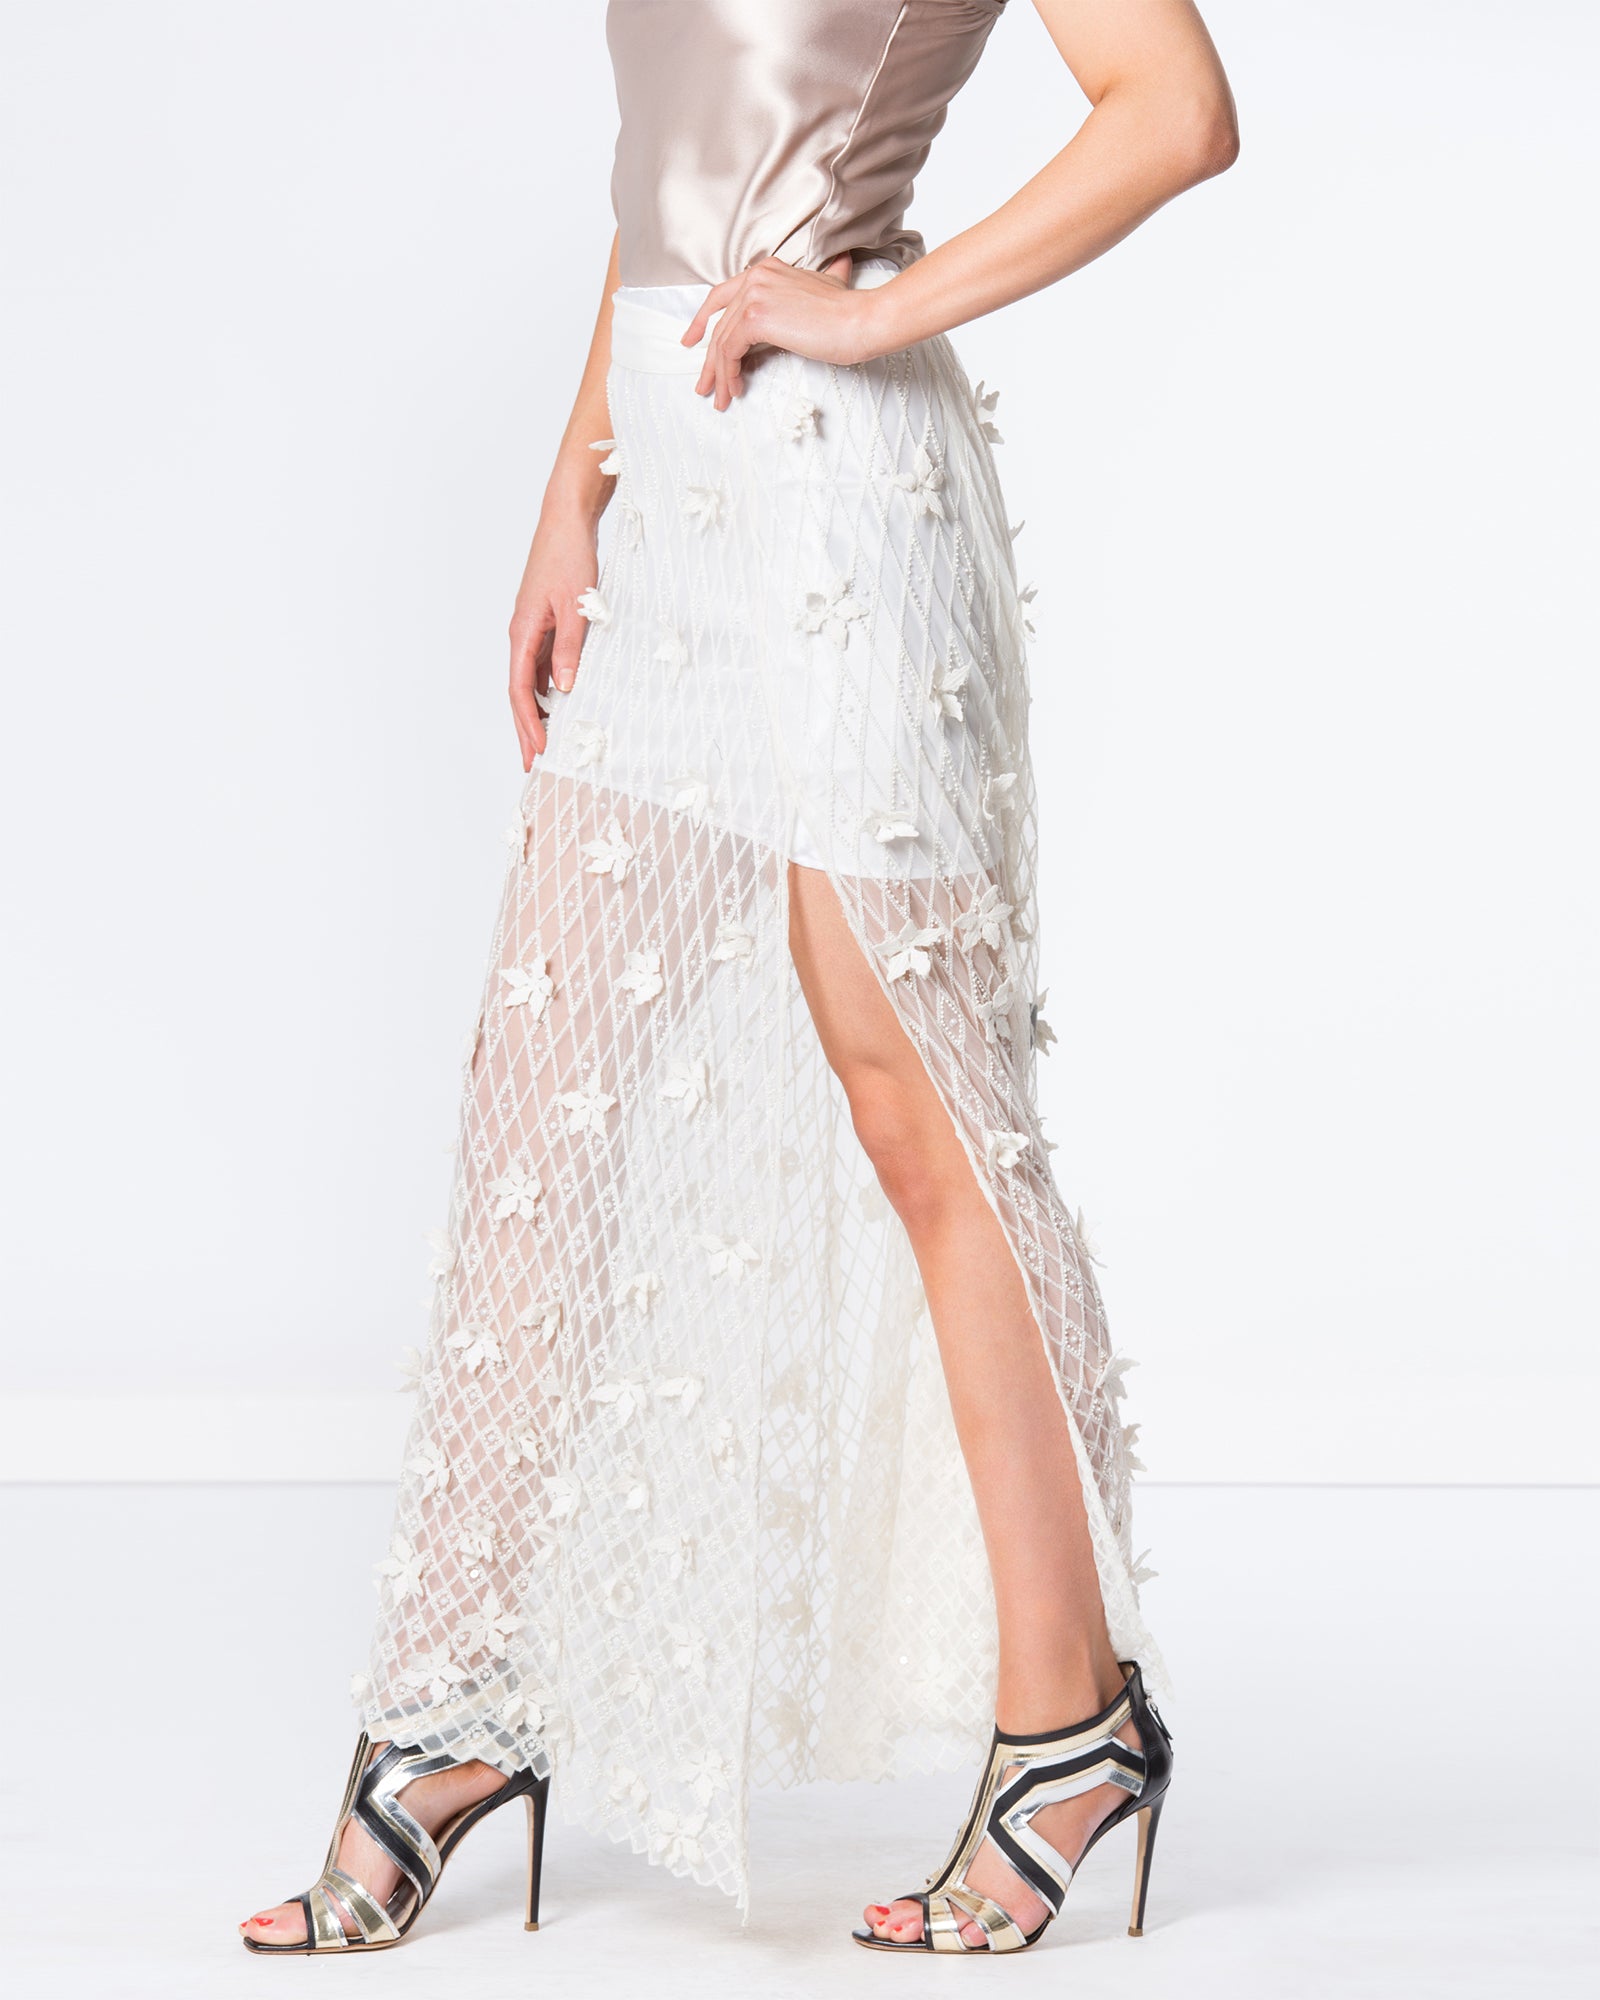 Mesh Beaded Maxi Skirt With Hand-Sewn Floral Structures